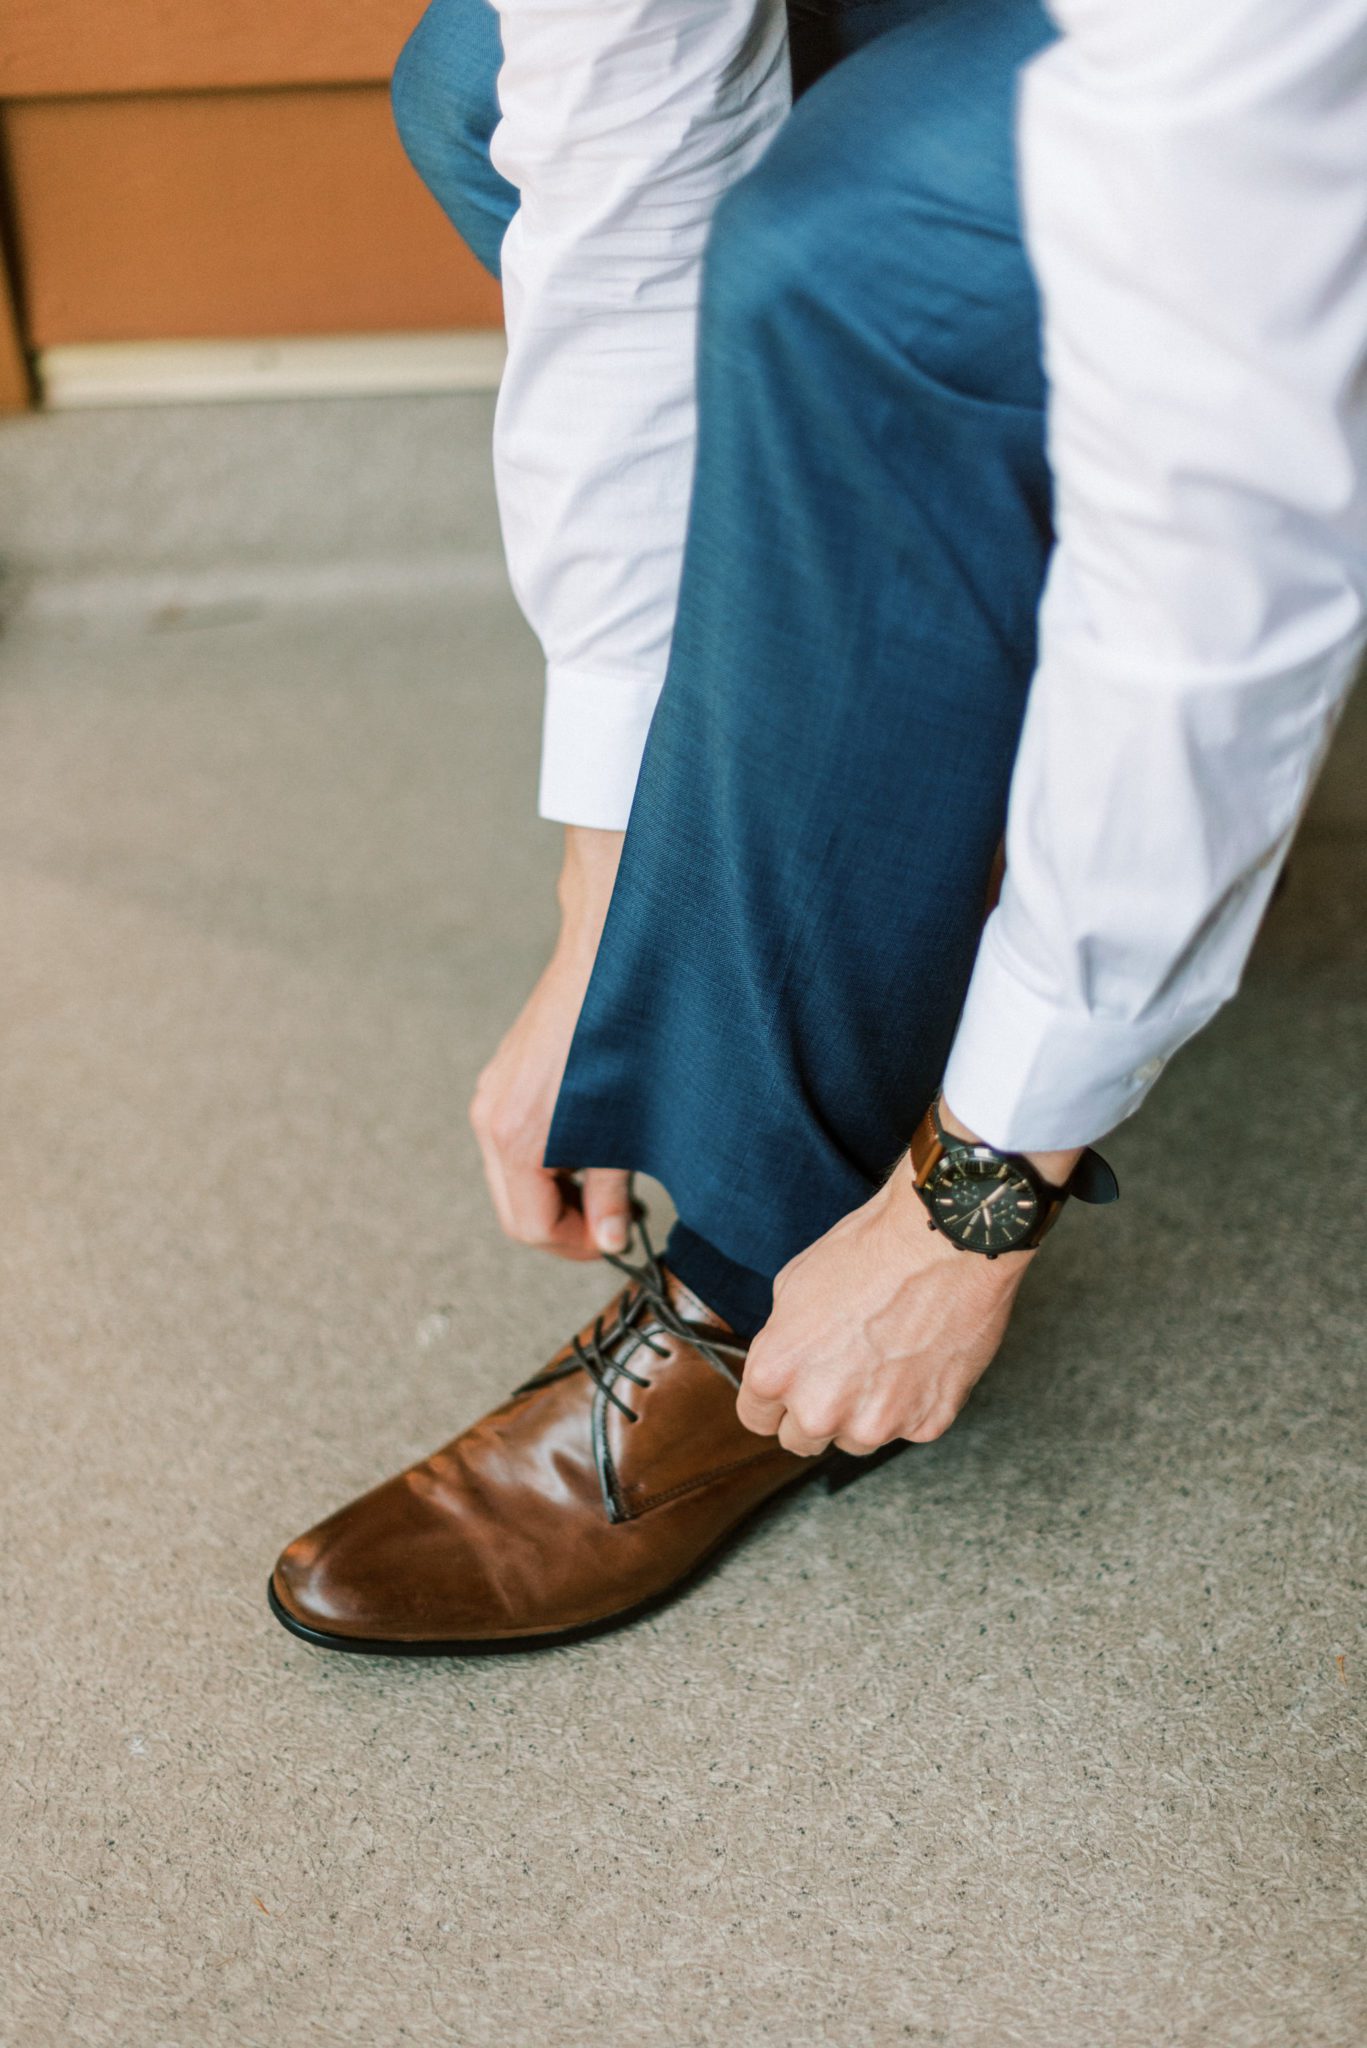 Groom attire inspiration with navy suit and brown shoes